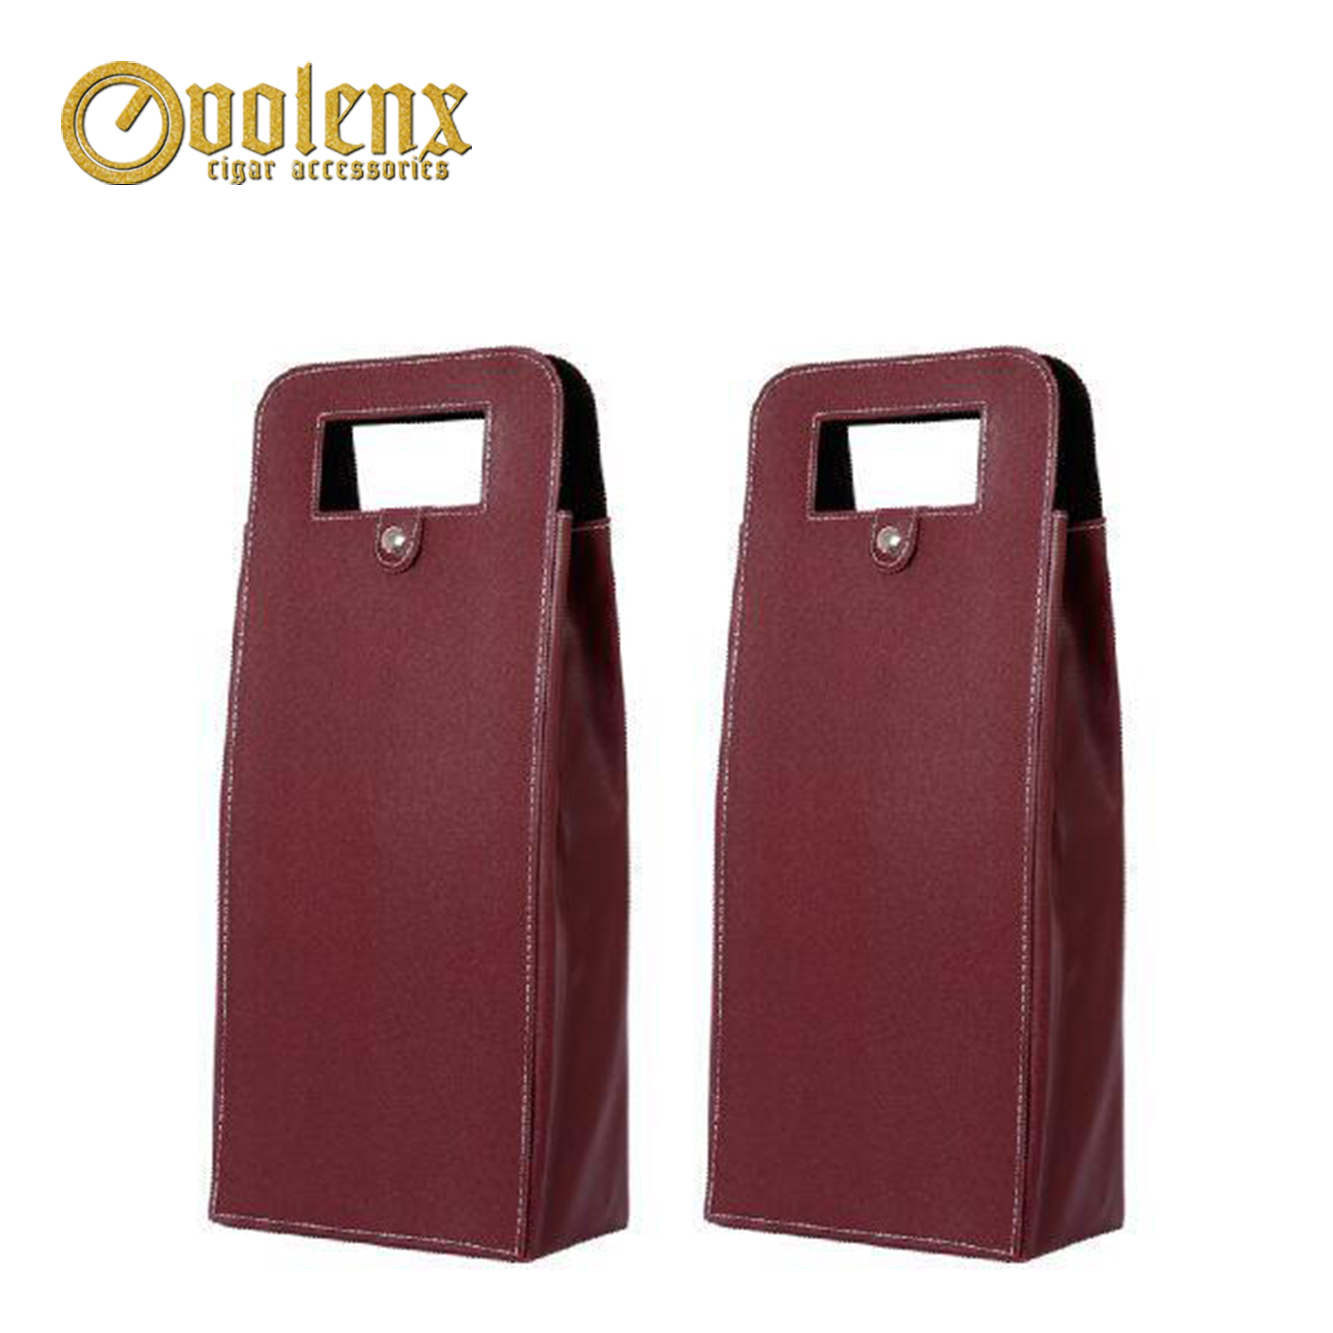 Wholesale Luxury PU Leather Wine Bottle Carrier Bag Gift Box 2